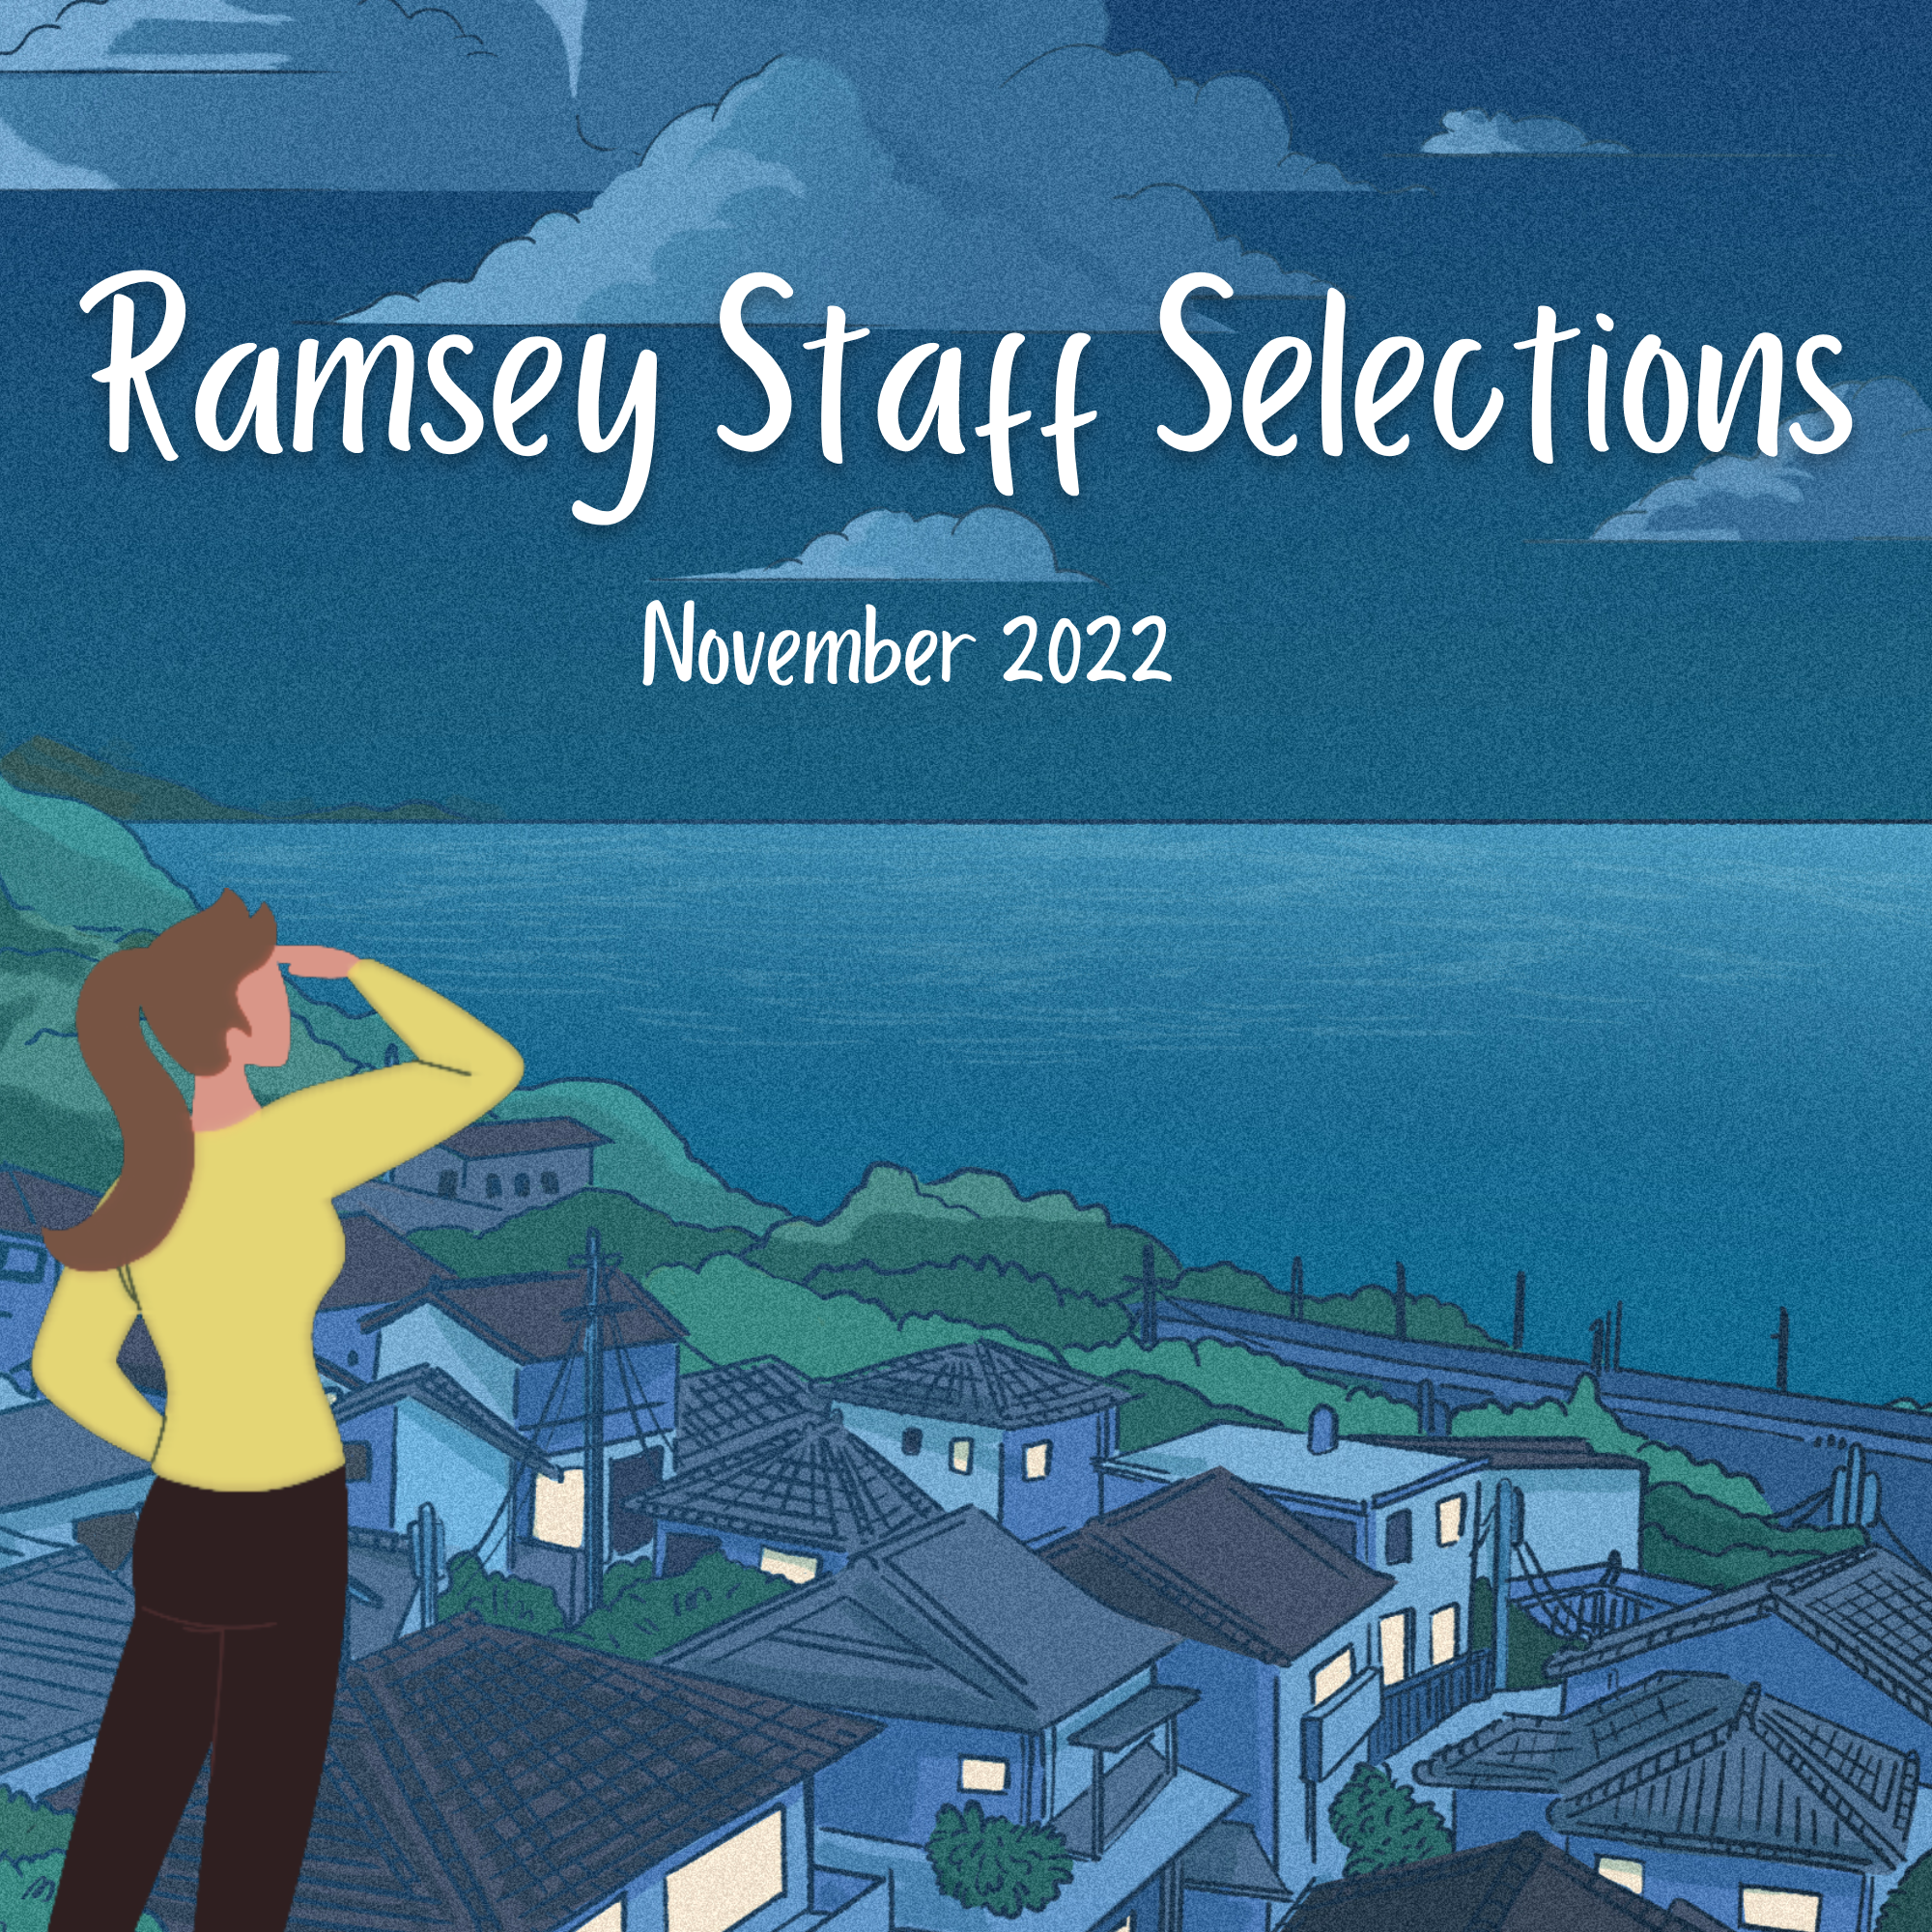 Ramsey Staff Selections for November 2022